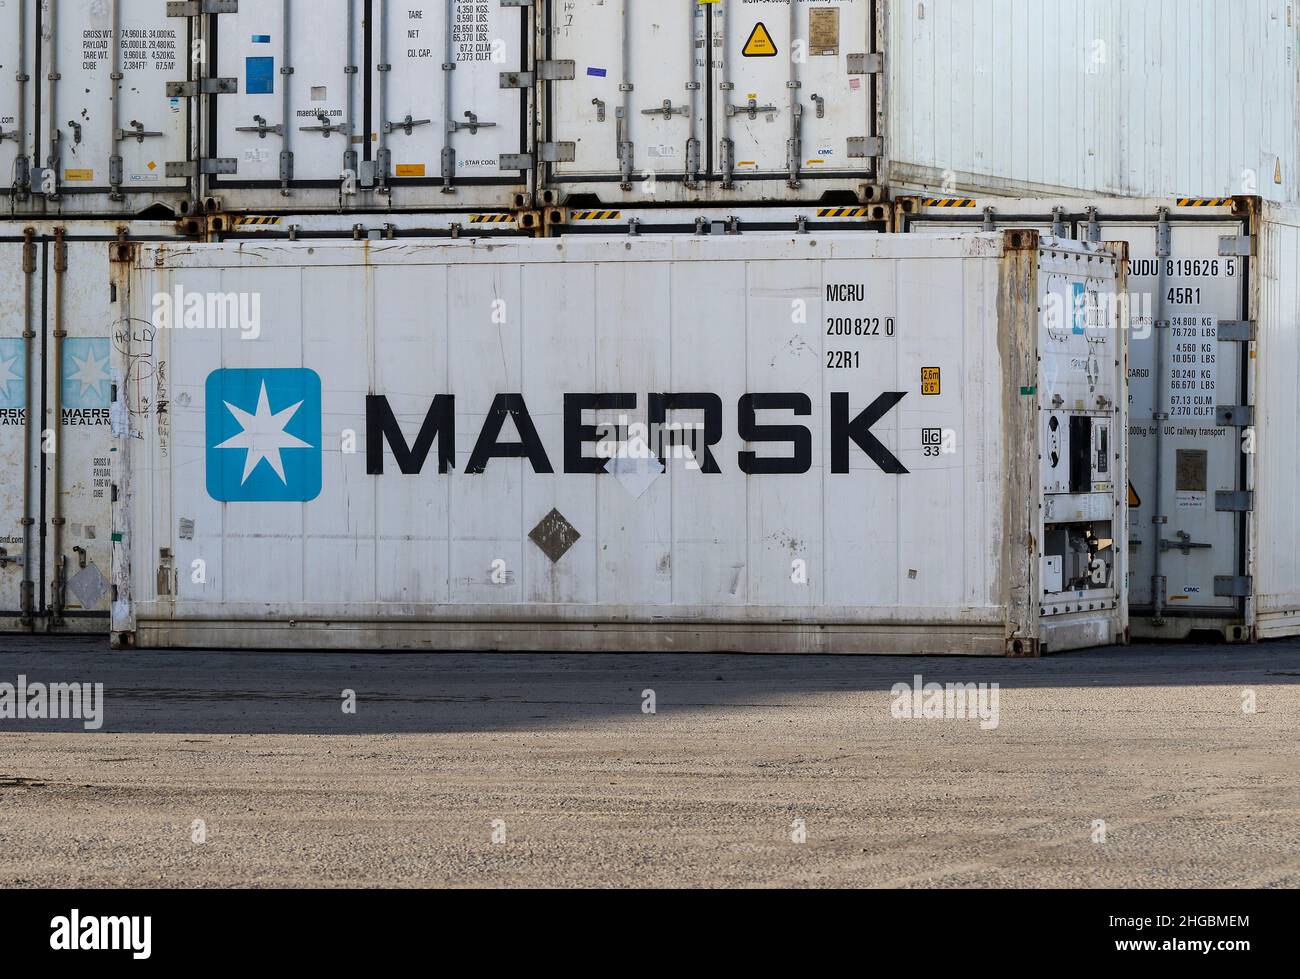 Maersk shipping containers with company logo signage. White refrigerated crates used to transport or ship chilled goods or freight. Ireland Stock Photo